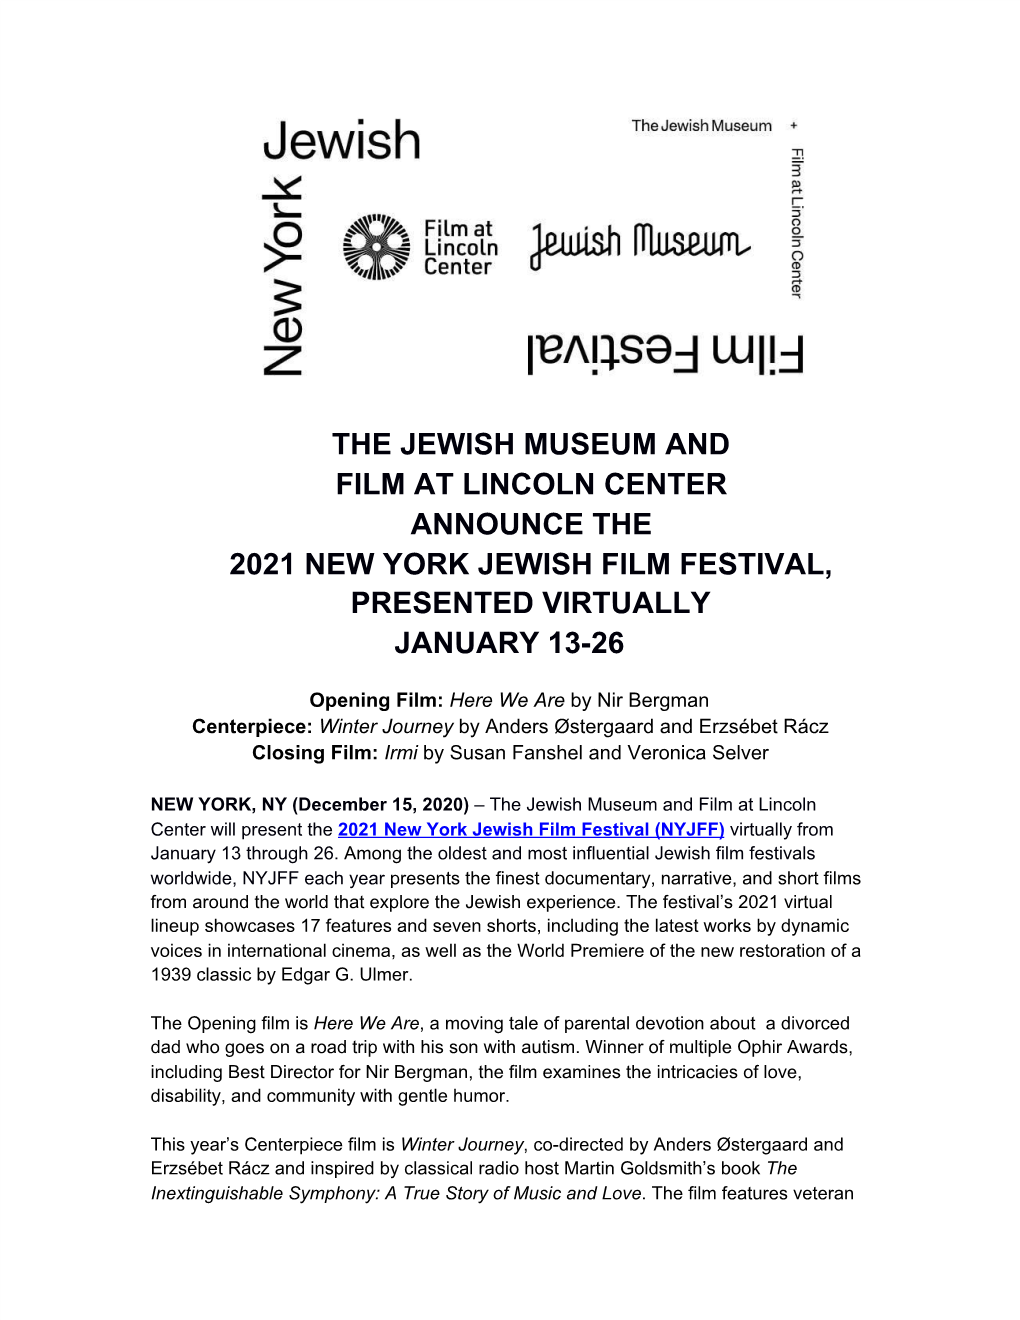 The Jewish Museum and Film at Lincoln Center Announce the 2021 New York Jewish Film Festival, Presented Virtually January 13-26